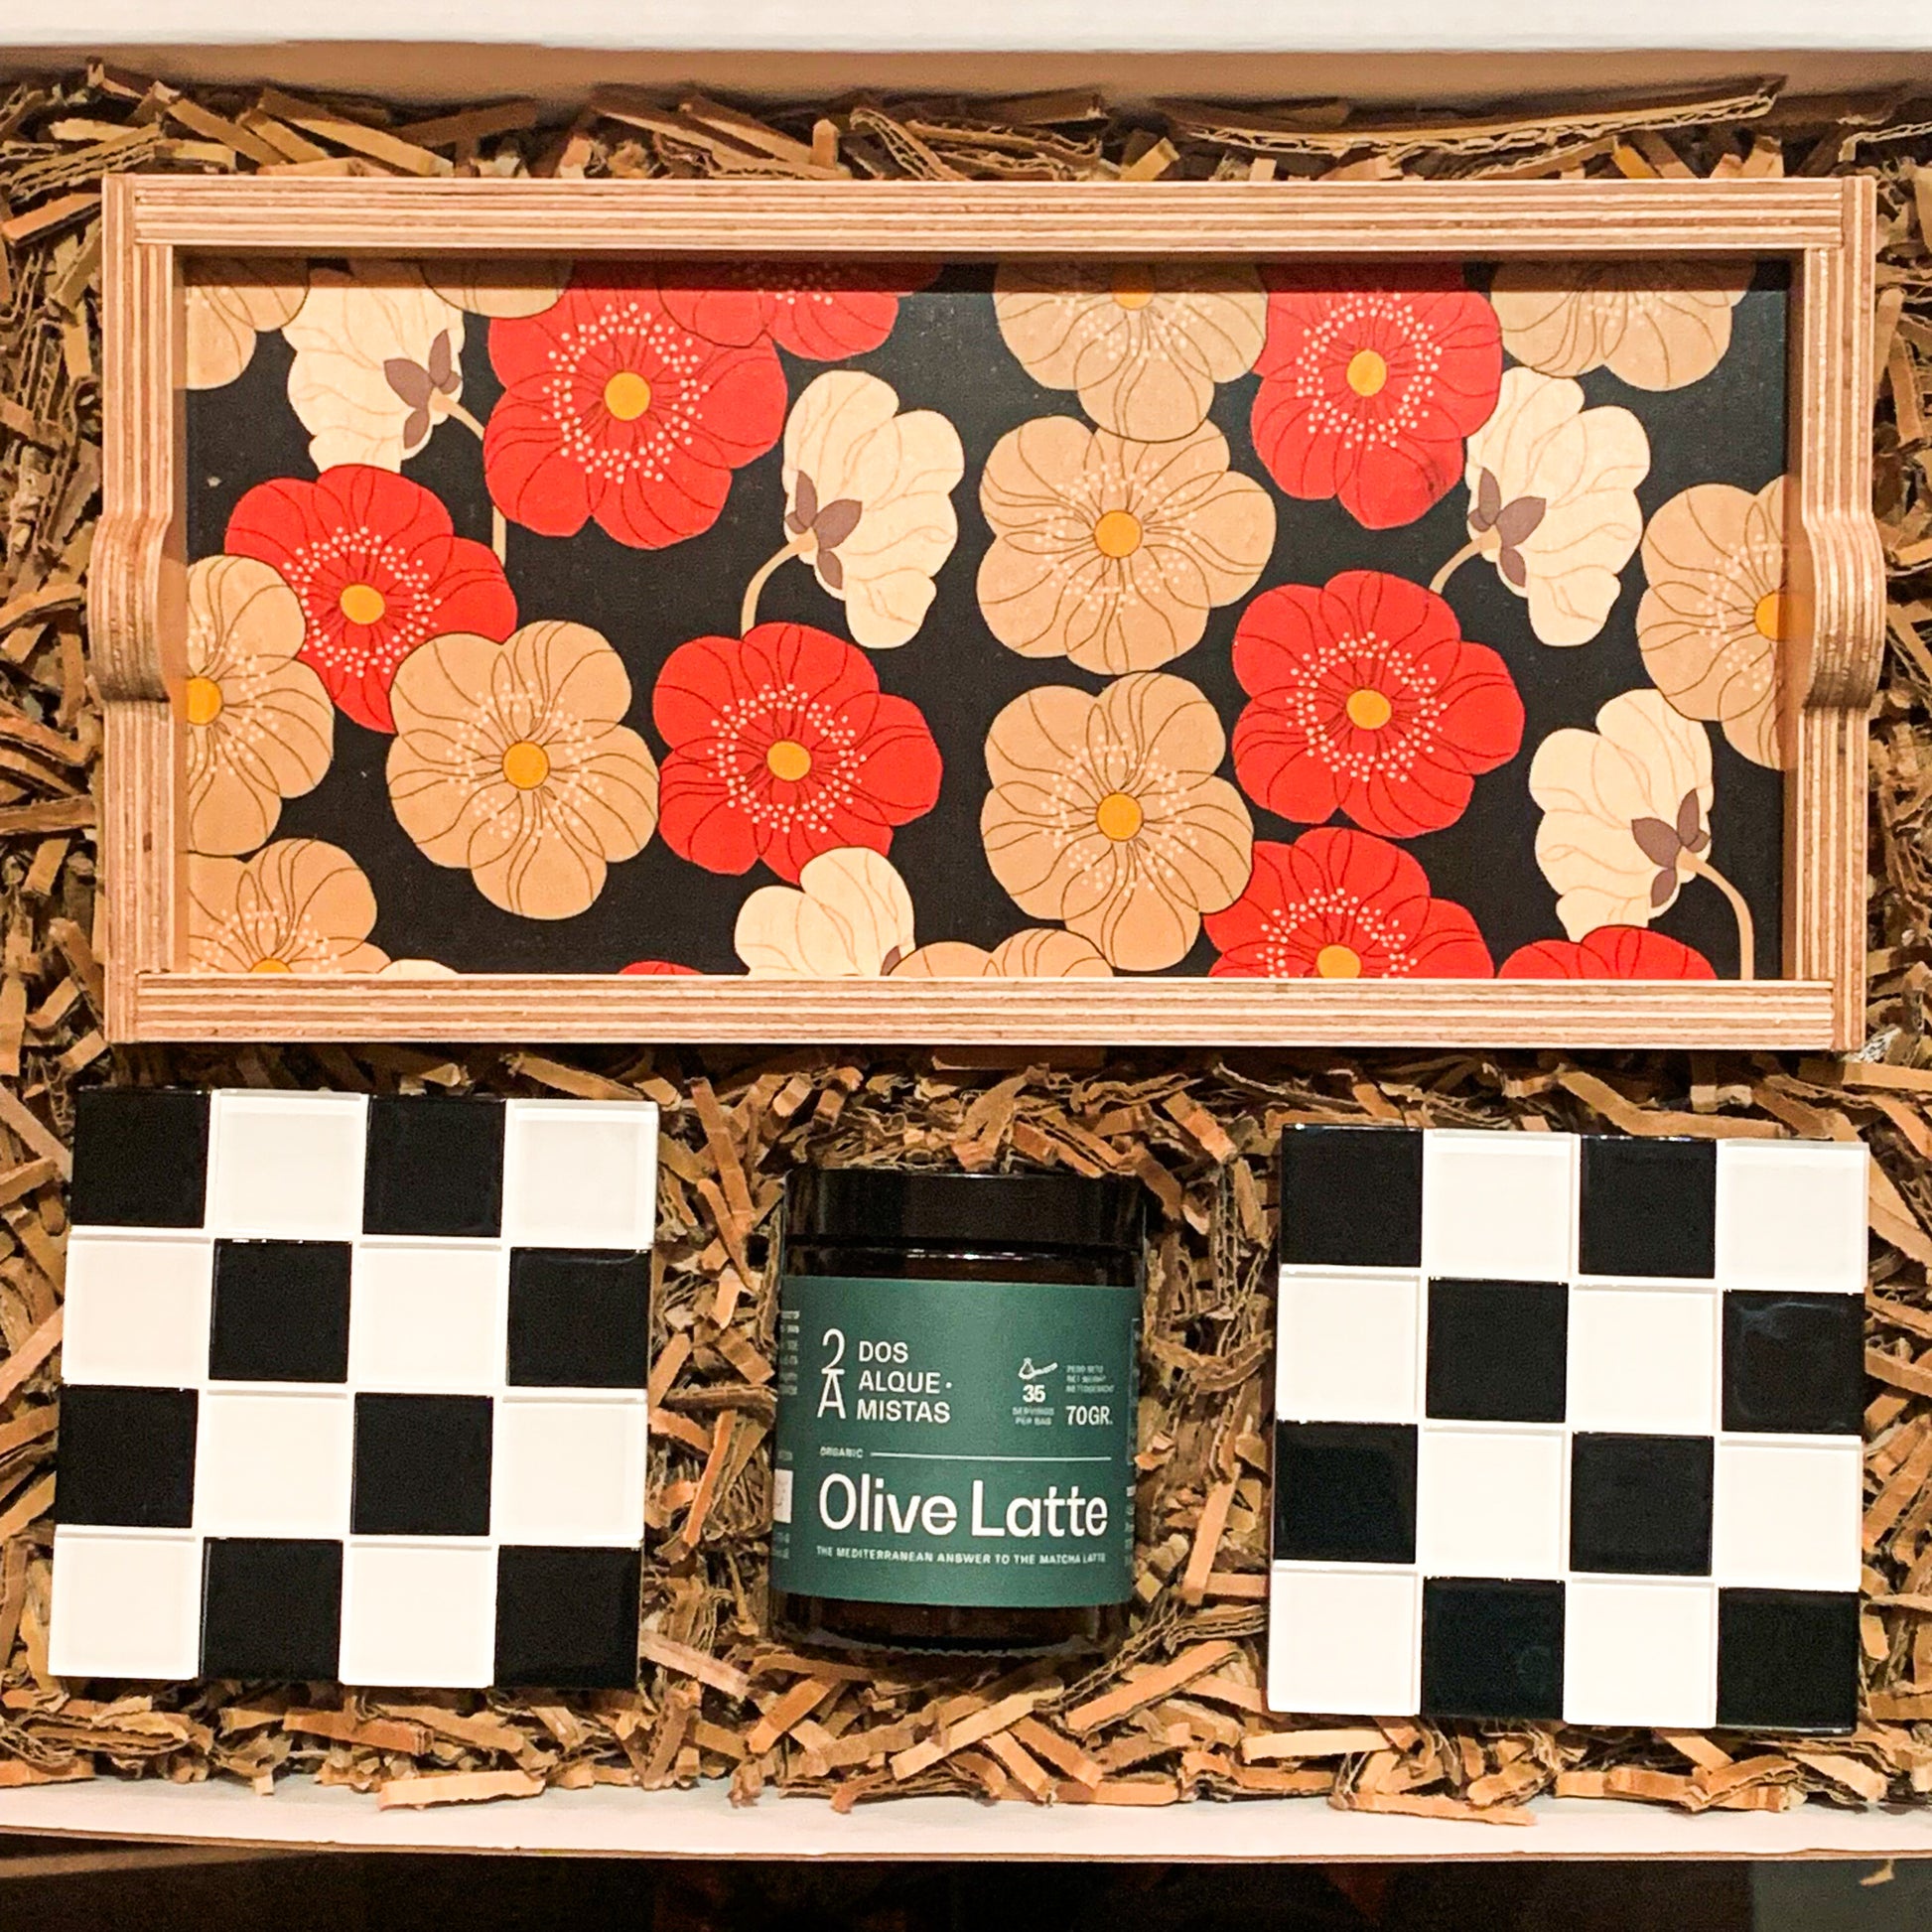 "Table for Two"eco-friendly gift box with an olive latte mix by Dos Alquemistas, a pair of black & white checkered tile coaster and a wooden decorative tray with large beige white and red poppies on a black background